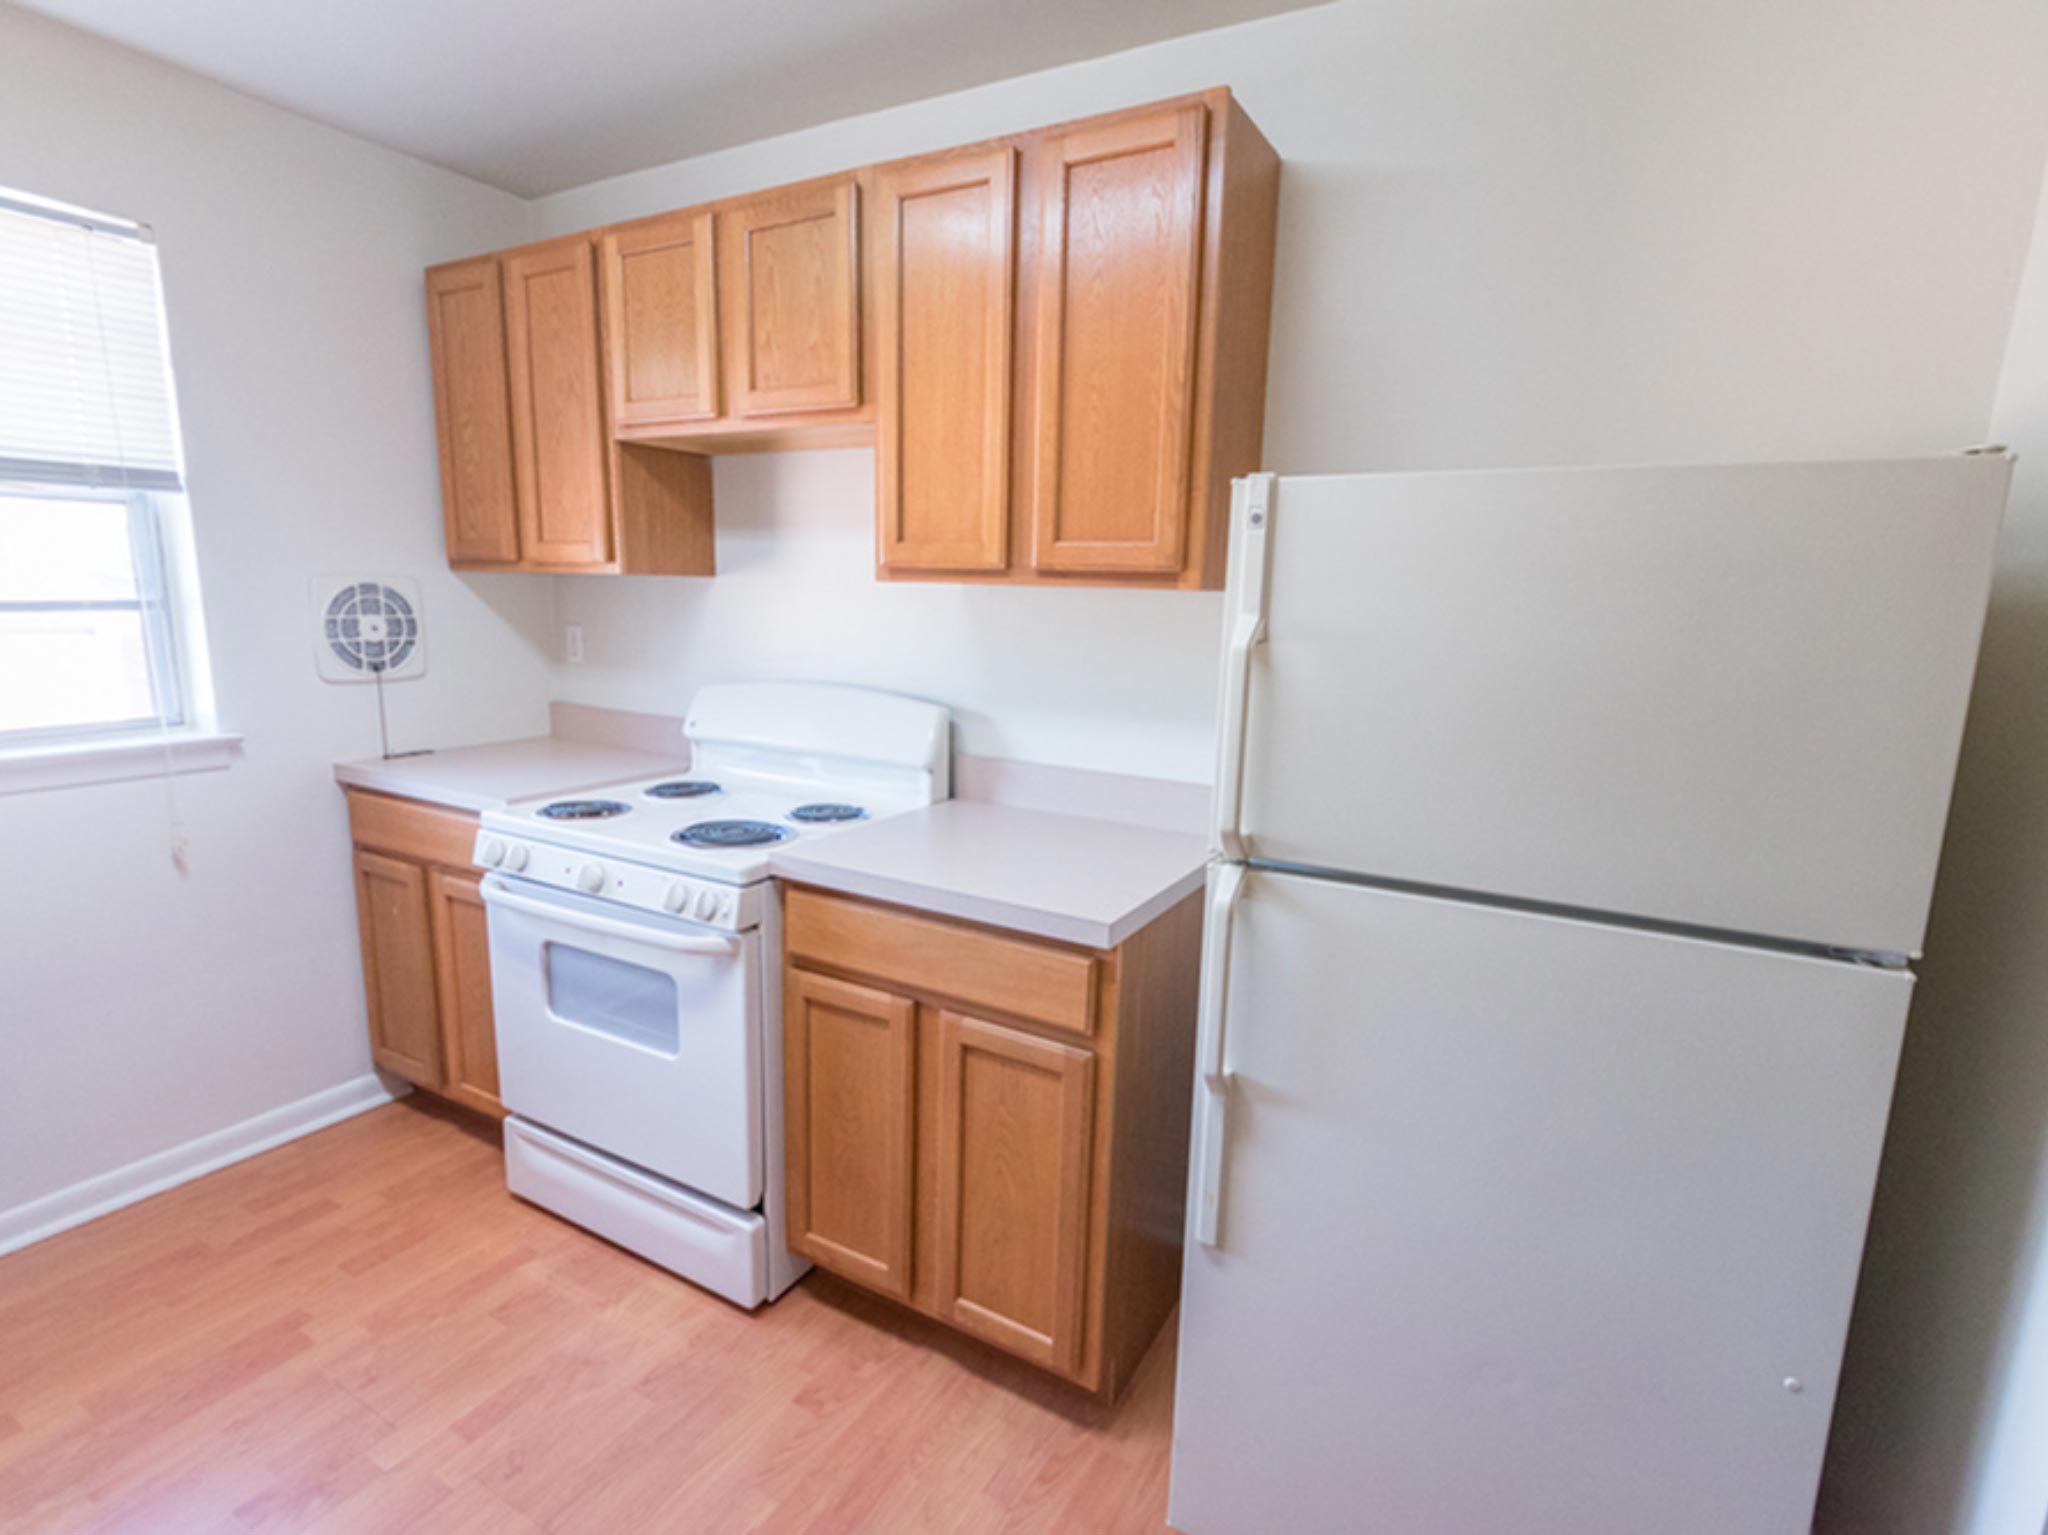 Kitchen with wooden cabinets, white appliances, and a window in Evergreen Club Apartments.